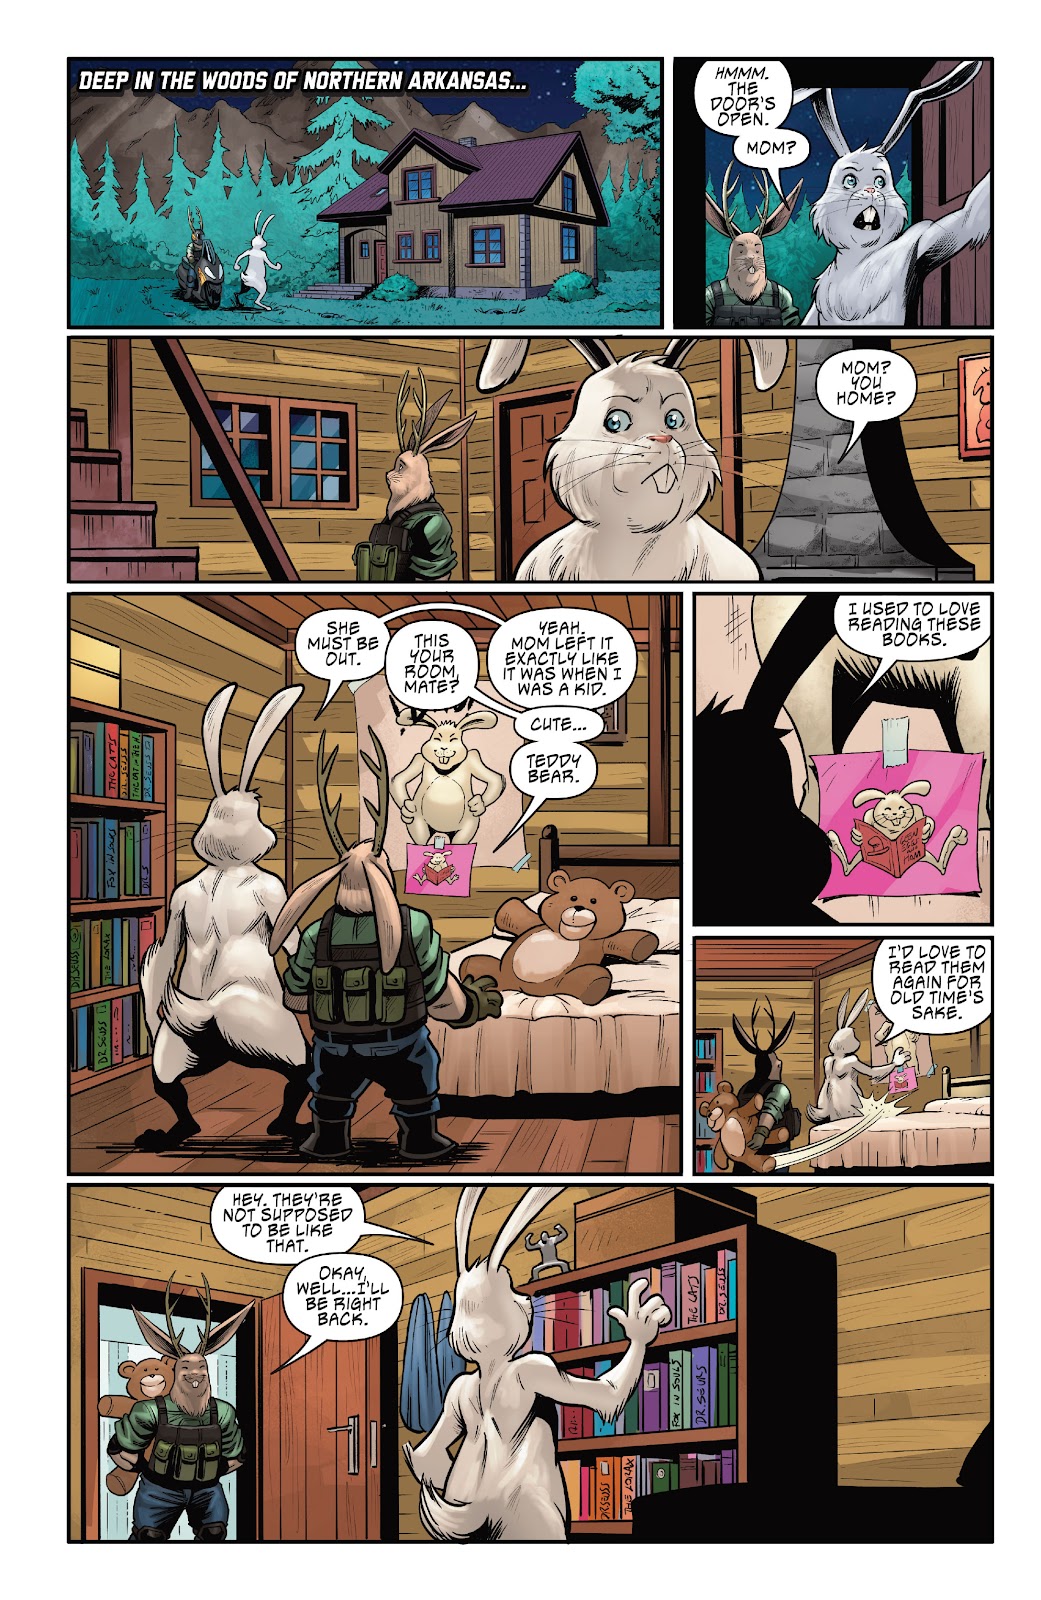 Man Goat & the Bunnyman: Green Eggs & Blam issue 1 - Page 23